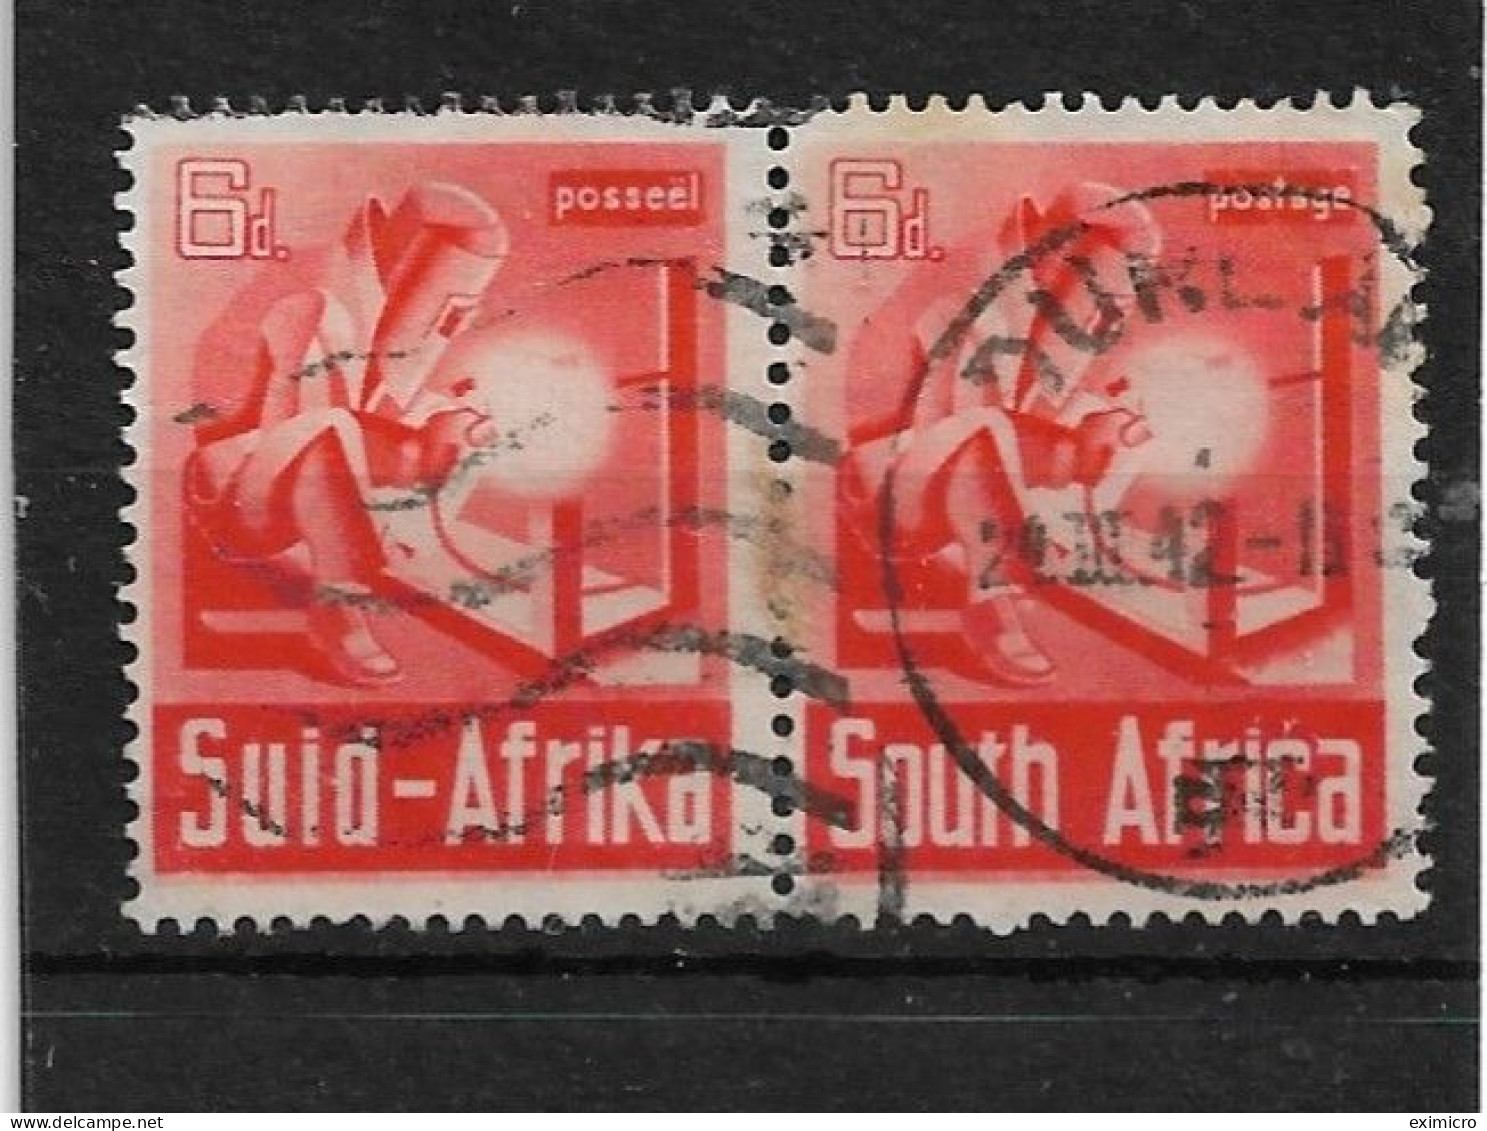 SOUTH AFRICA 1941 6d RED - ORANGE SG 93 FINE USED Cat £19 - Used Stamps